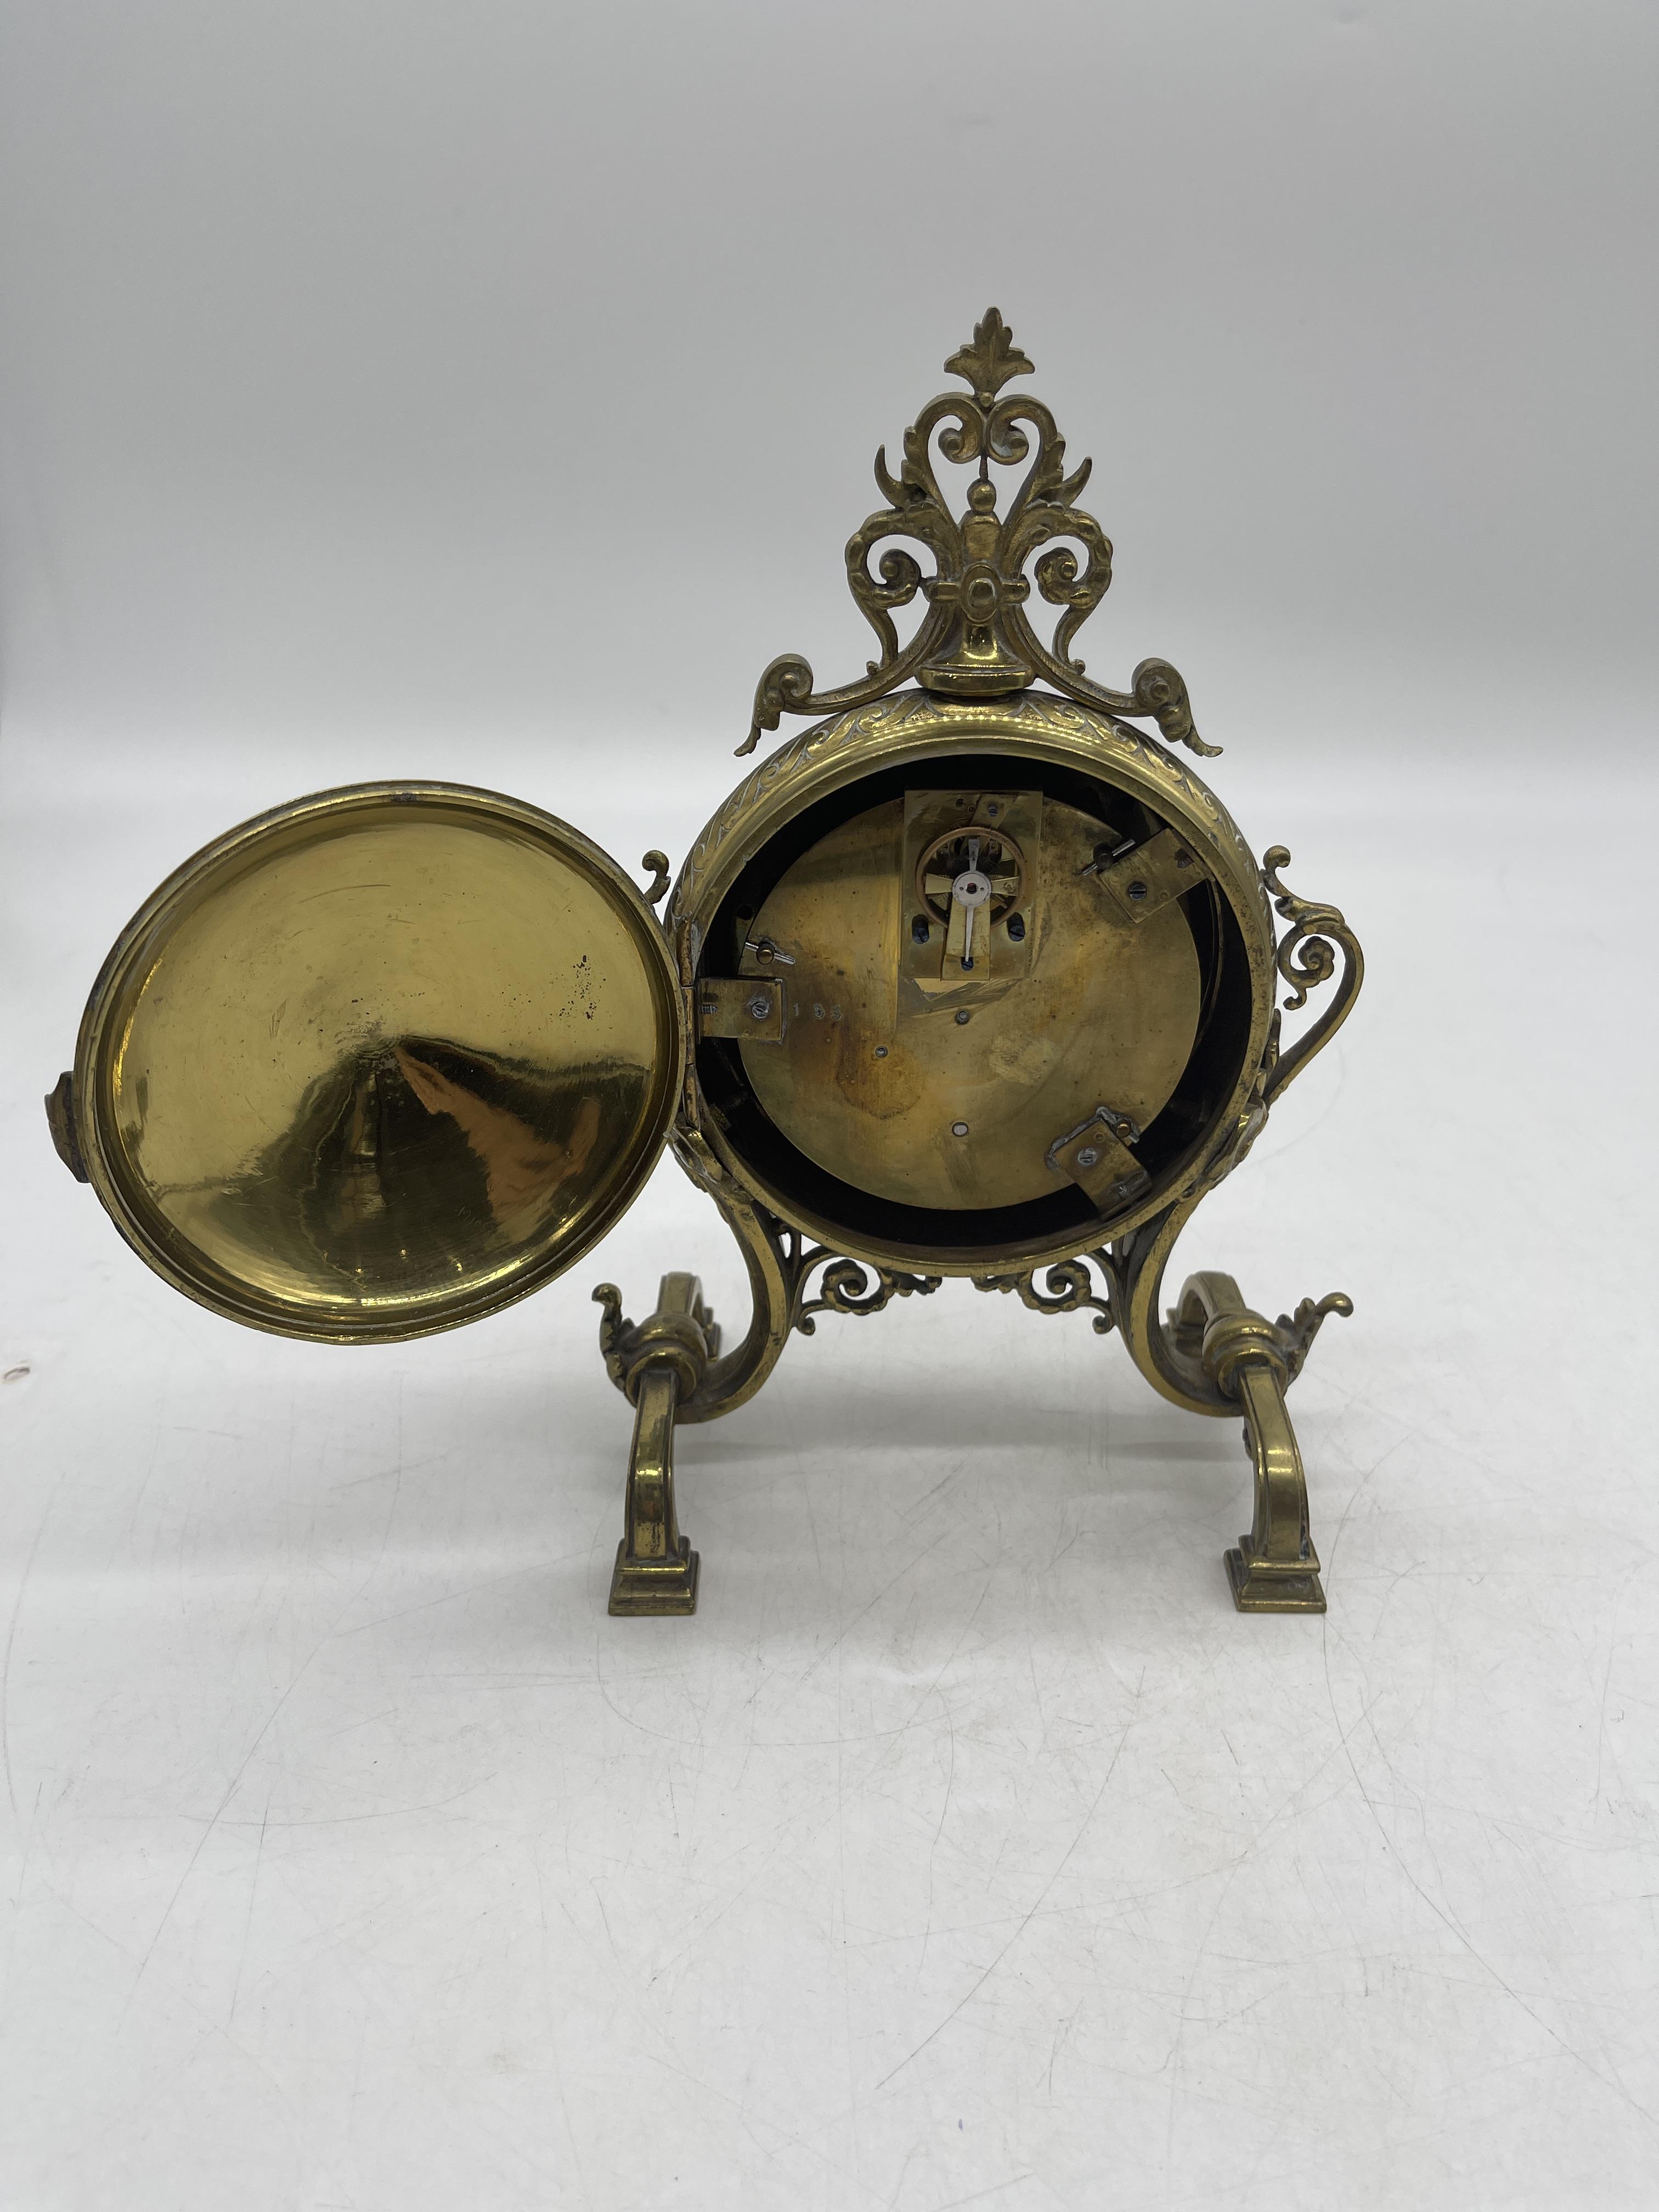 Antique French Brass and Enamel Mantel Clock. - Image 12 of 14